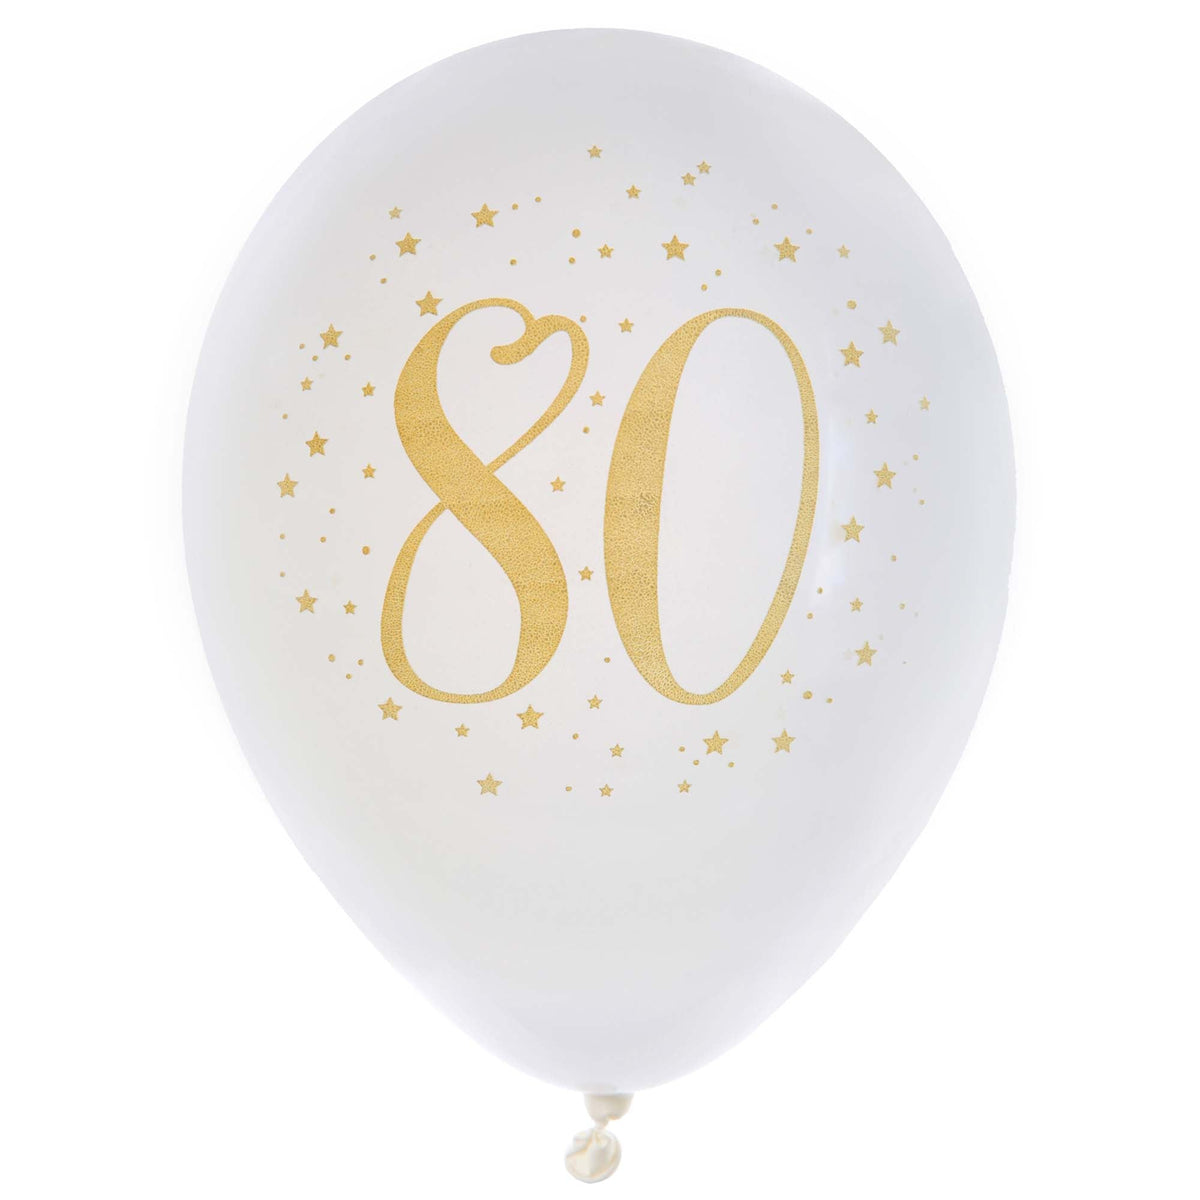 SANTEX Age Specific Birthday White and Gold 80th Birthday Latex Balloons, 12 Inches, 6 Count 3660380051008